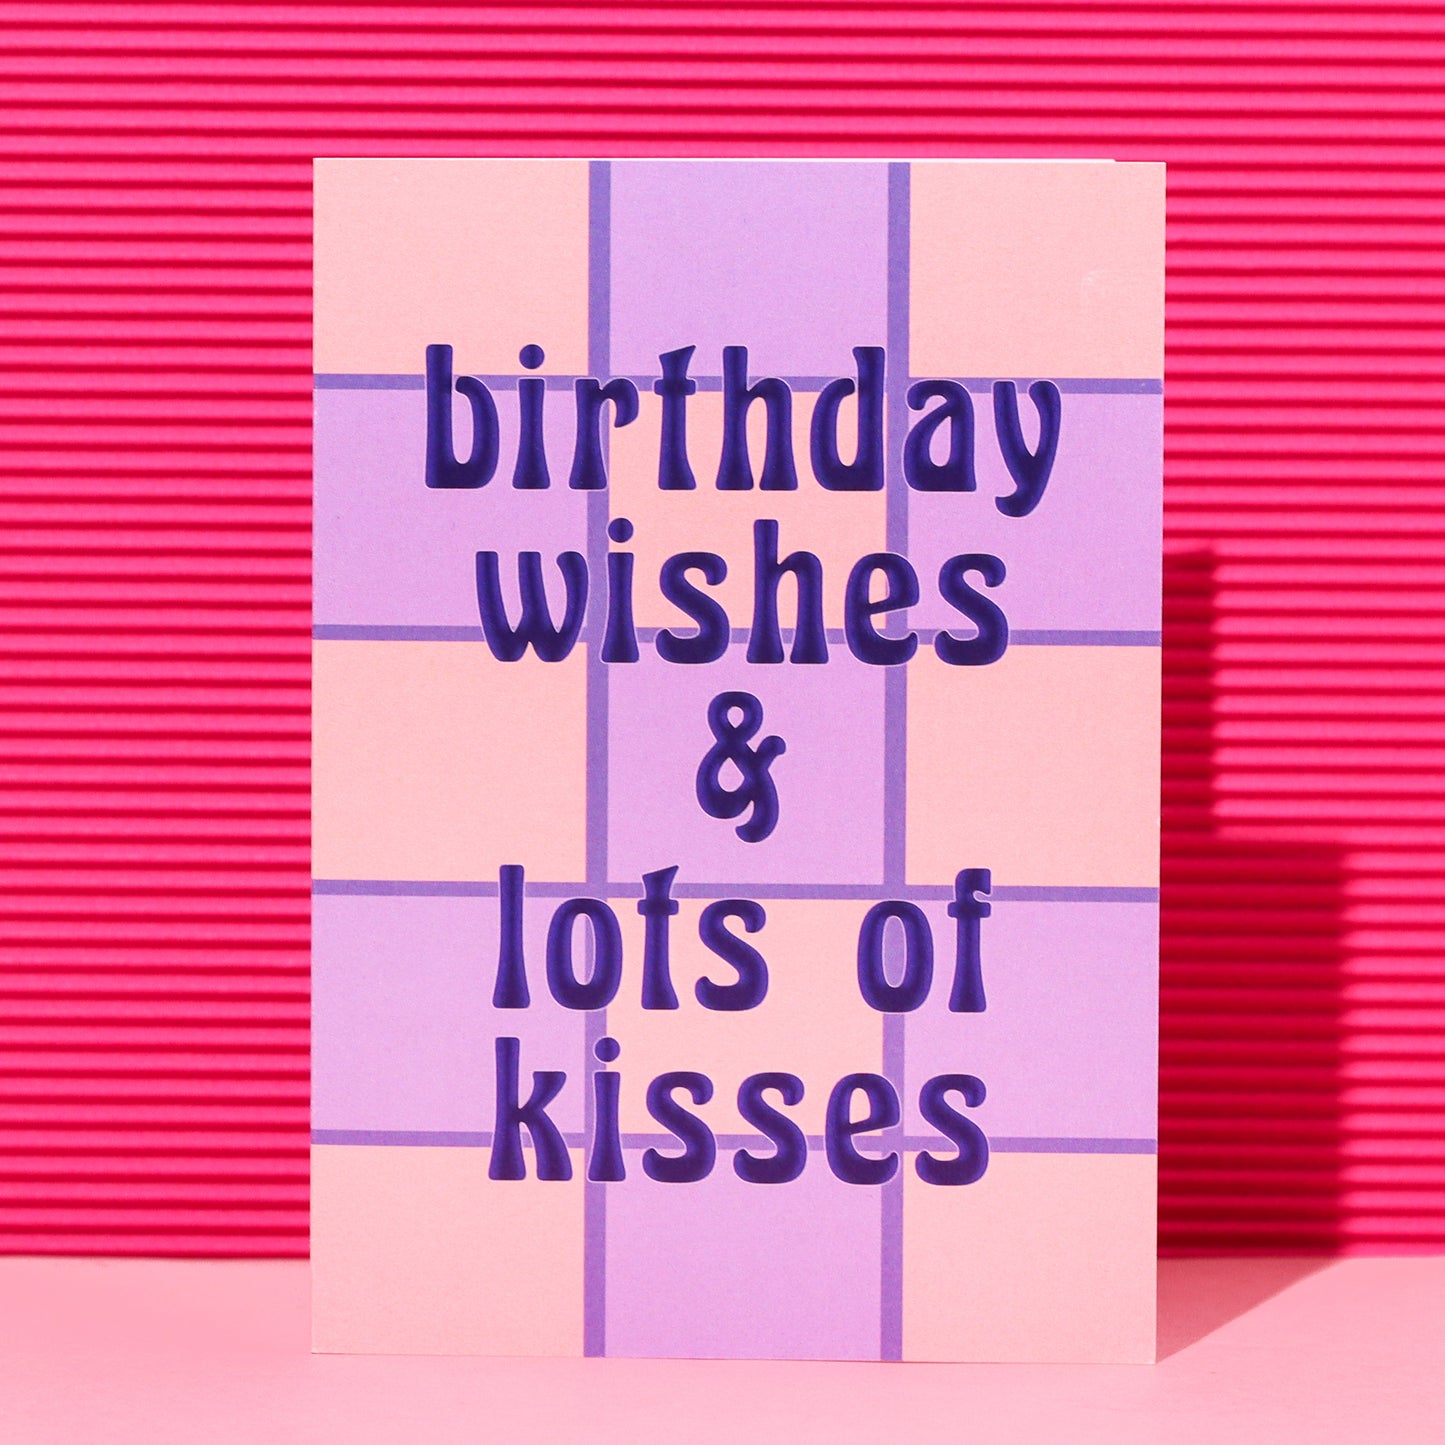 A6 Birthday Wishes & Lots of Kisses Card